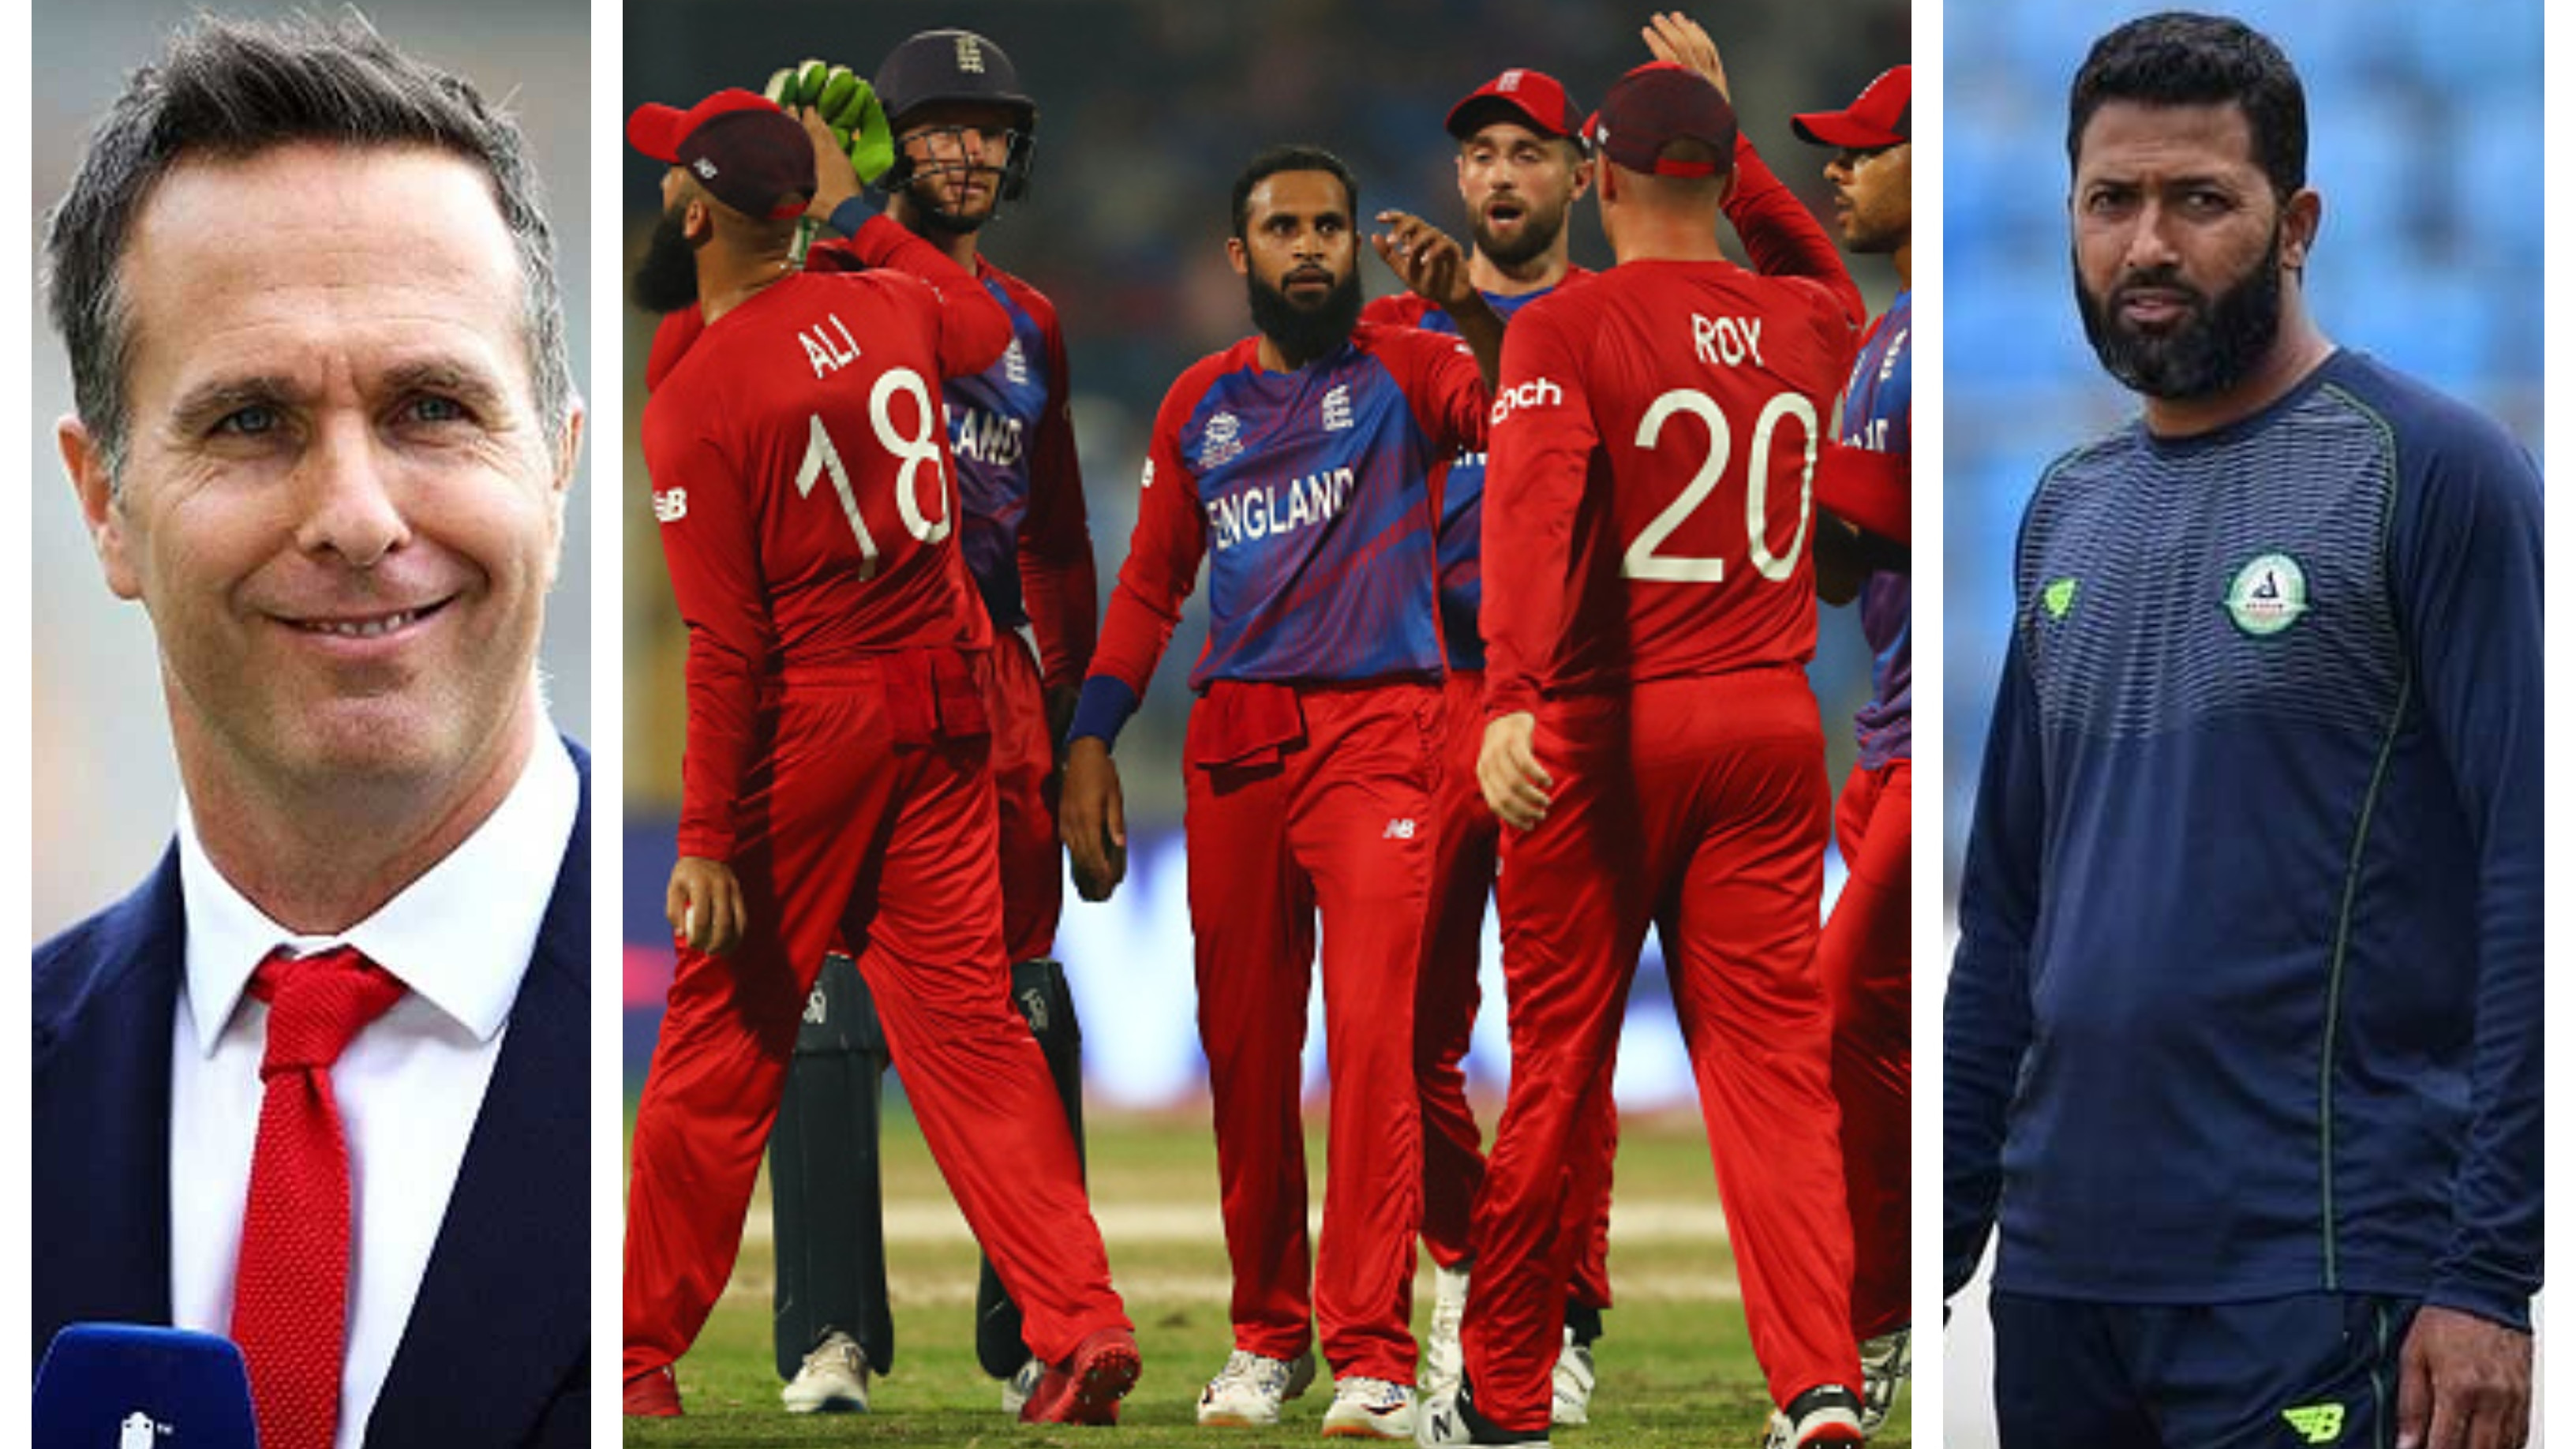 T20 World Cup 2021: Cricket fraternity reacts as England get closer to semi-final spot with 26-run win over Sri Lanka